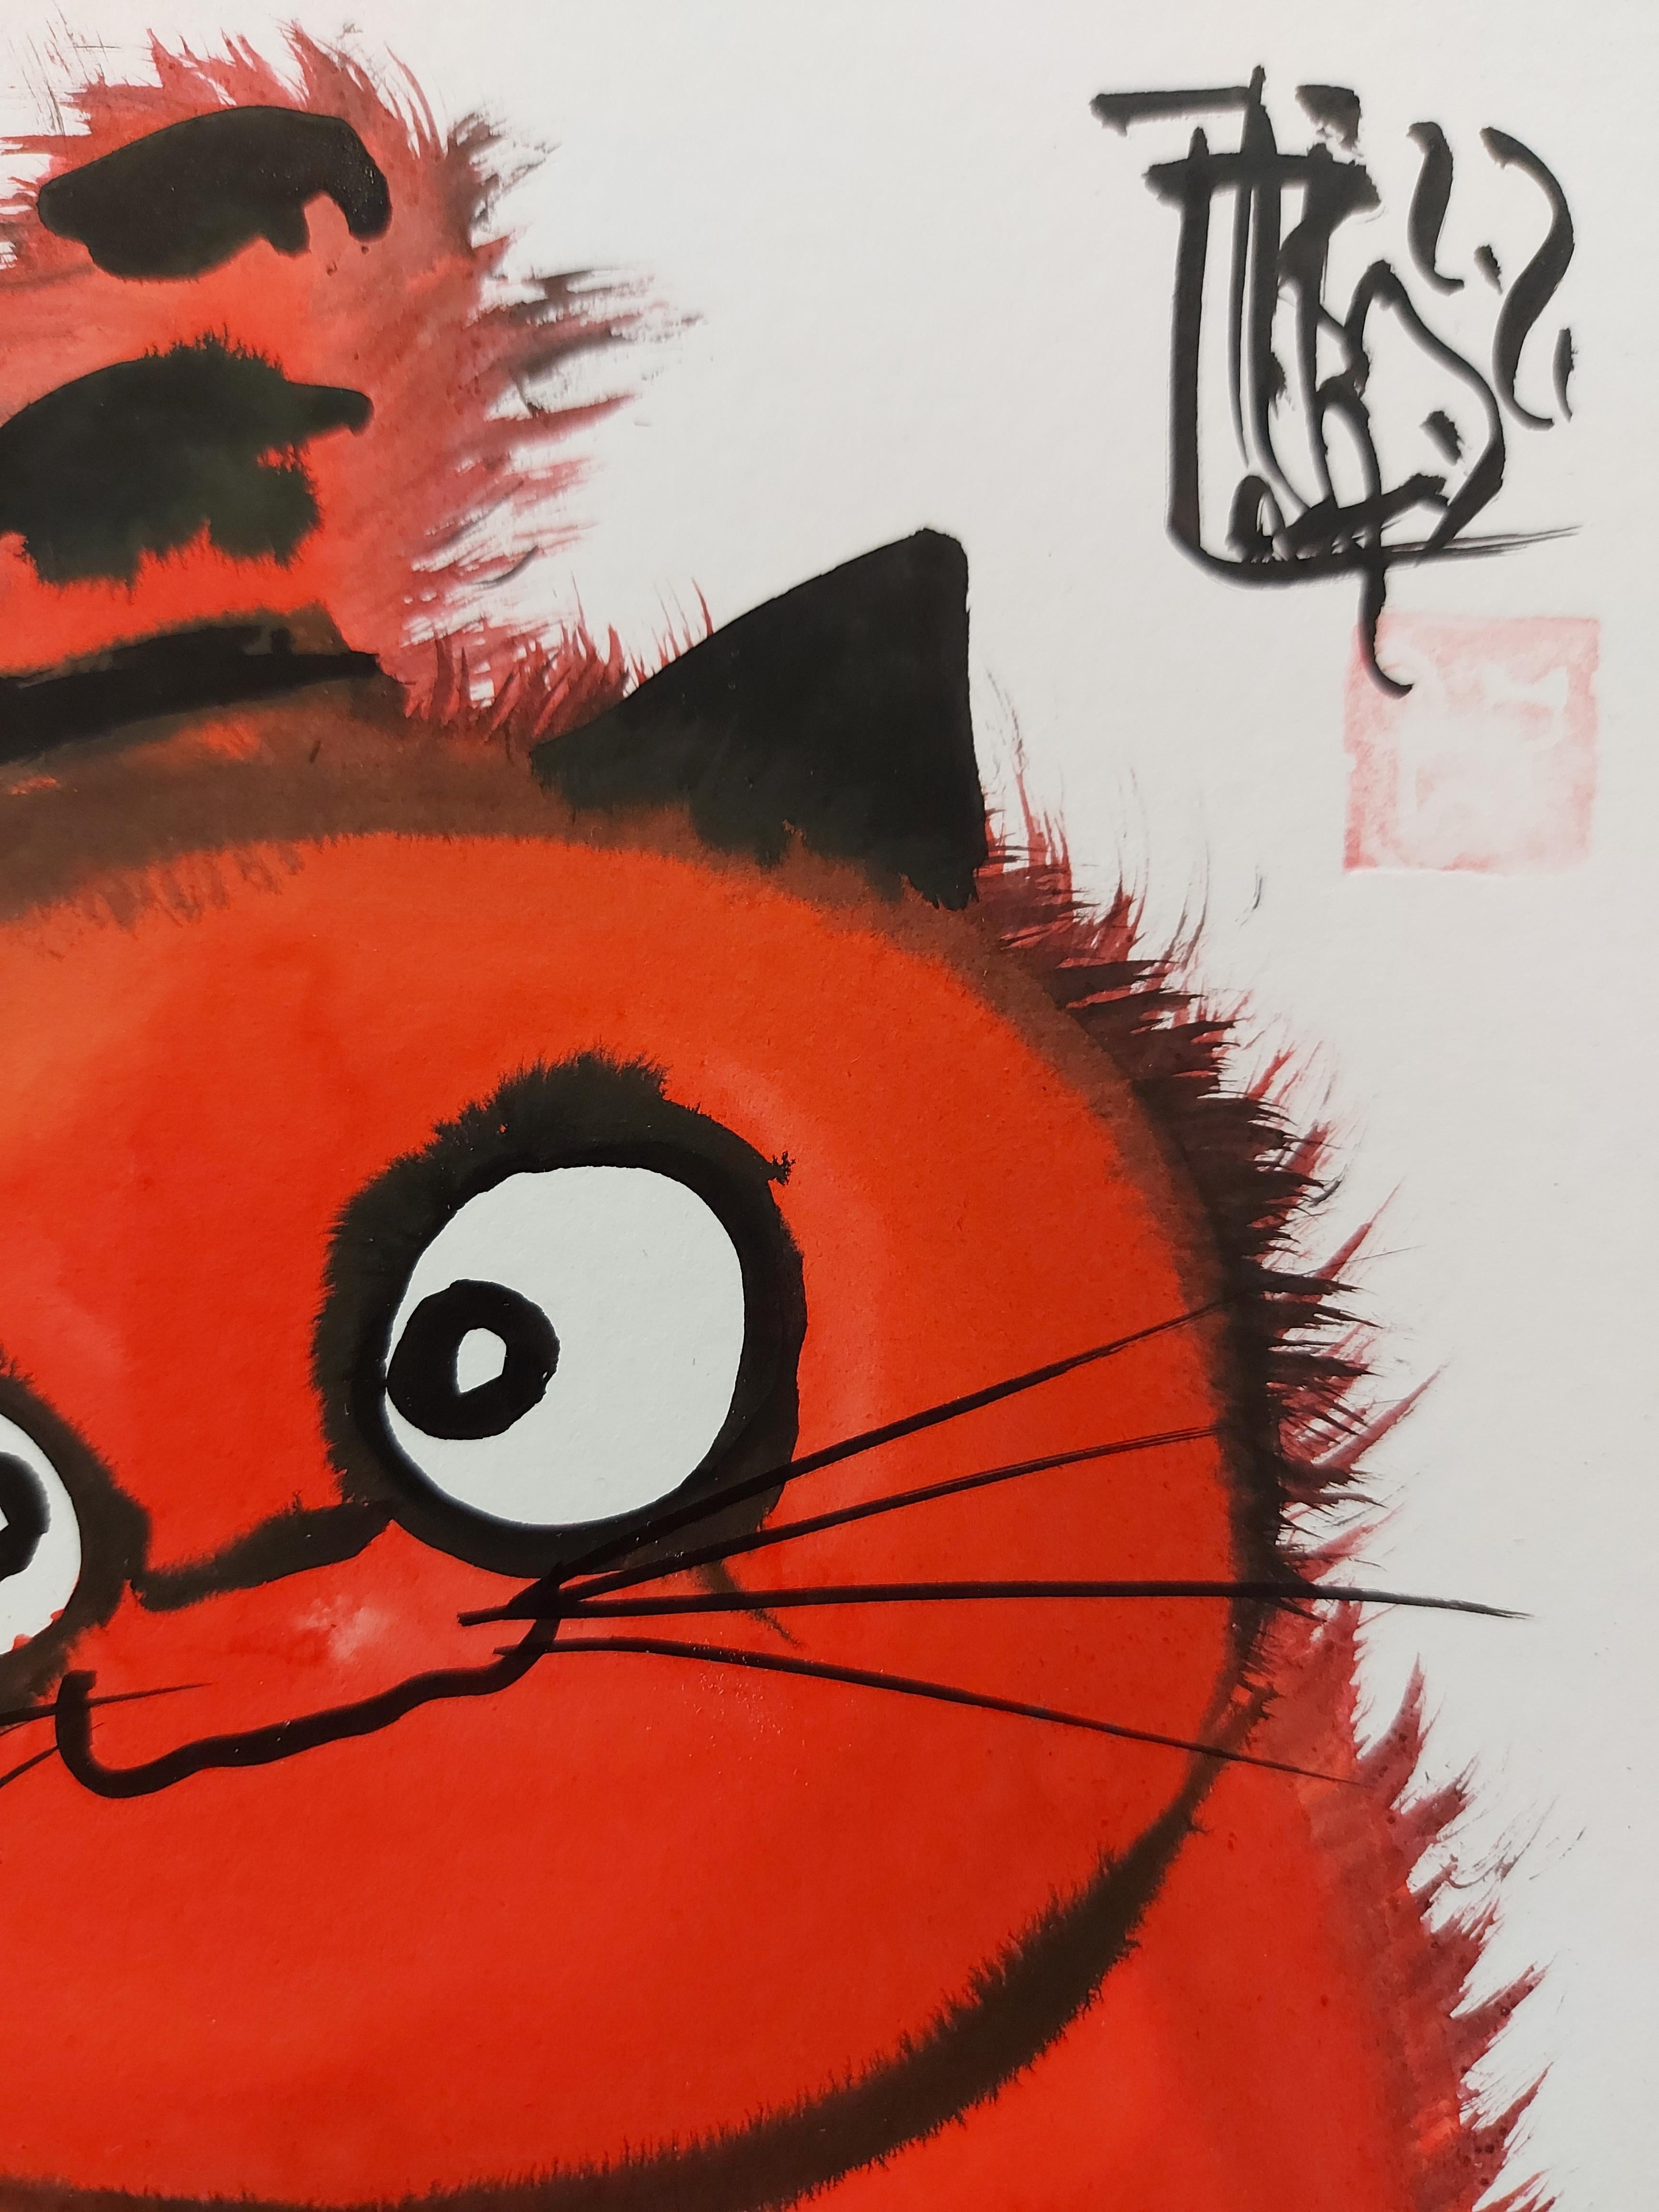 Laszlo TIBAY
Big Red Cat Waiting for a Game

Original India ink and lavish drawing
Handsigned
Bearing the stamp of the artist
On light board 30 x 20 cm (c. 12 x 8inch)

Excellent condition 